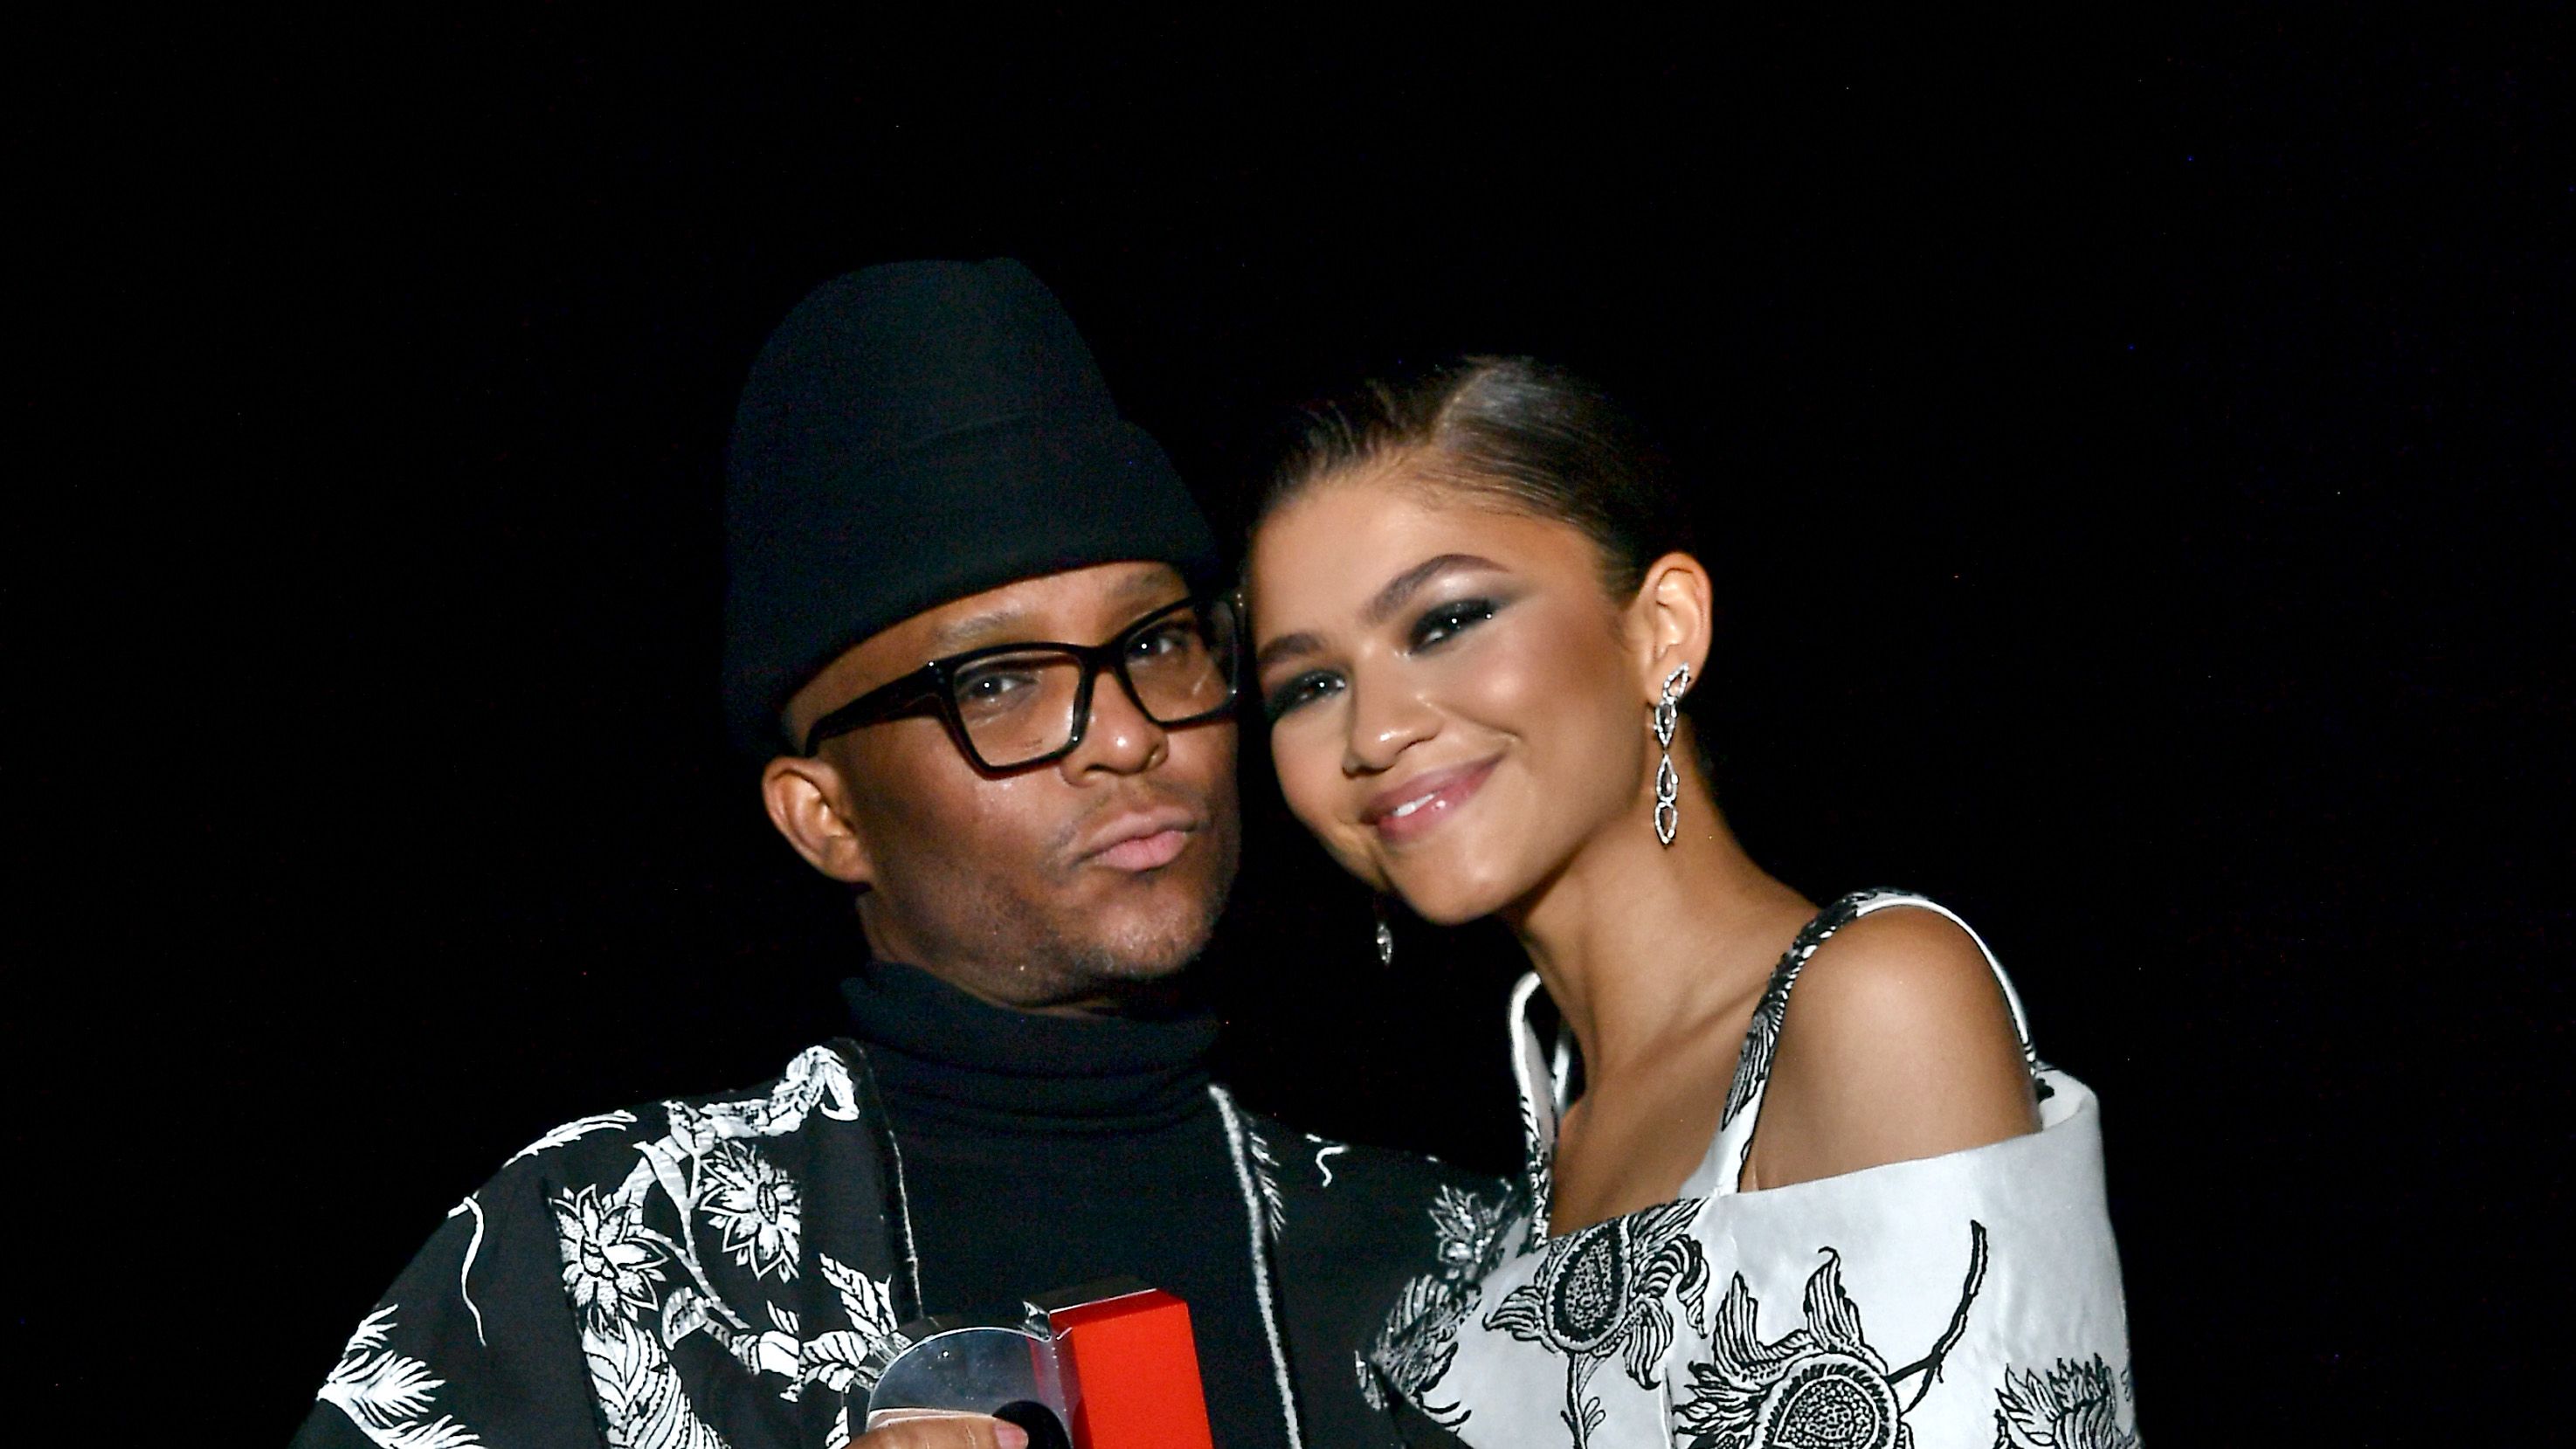 Zendaya defends Law Roach after viral Louis Vuitton seating issue: 'People  want to assume the worst